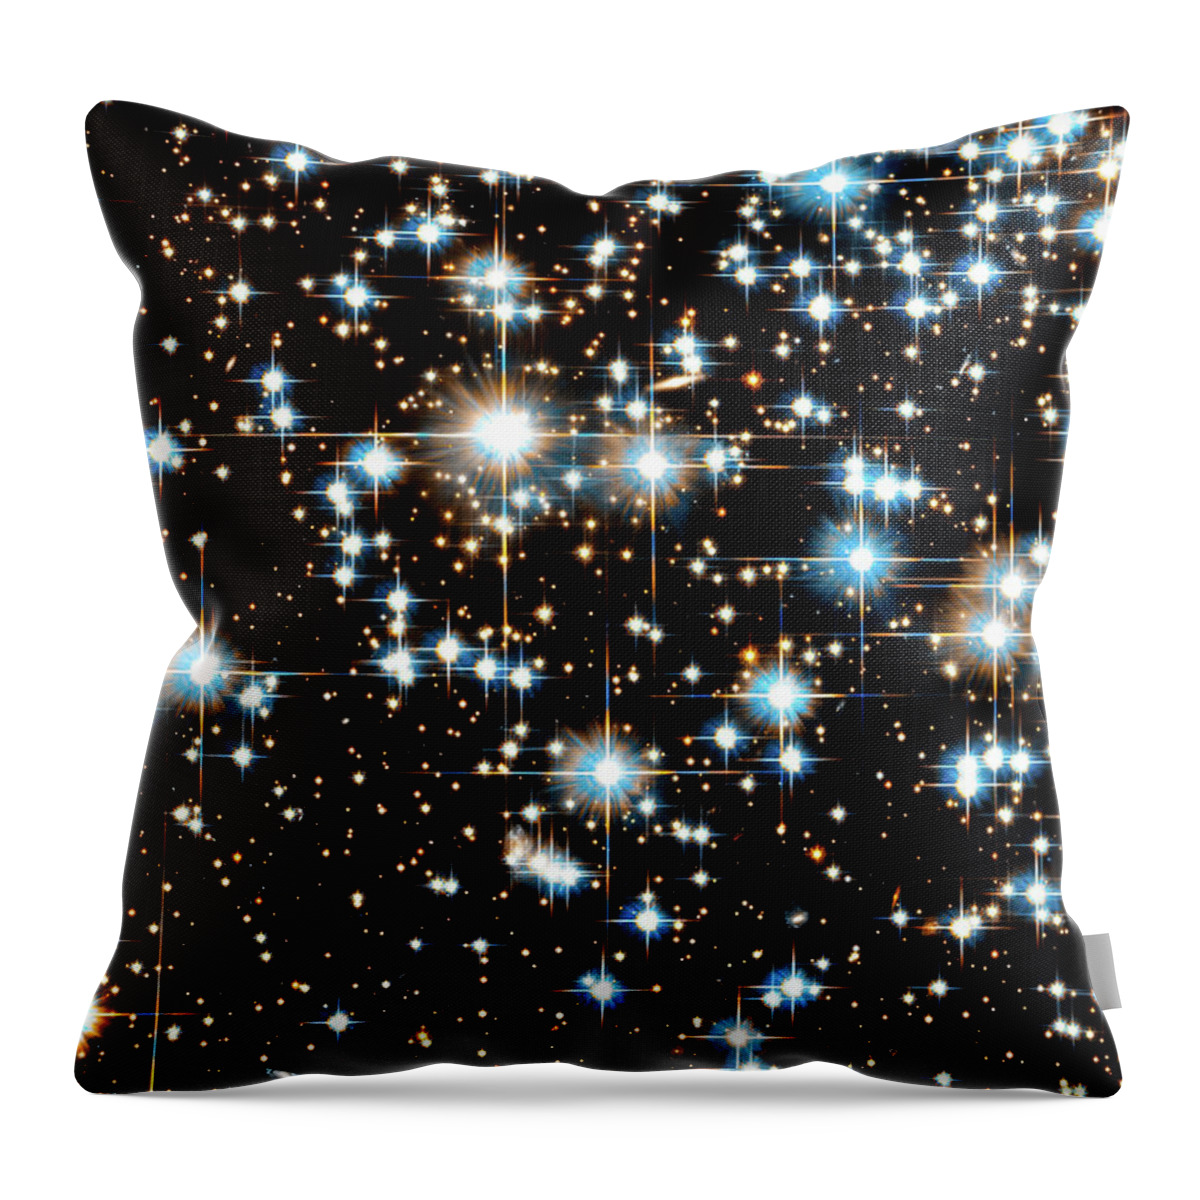 Ngc 6397 Throw Pillow featuring the photograph Globular Cluster NGC 6397 in Constellation Ara by M G Whittingham